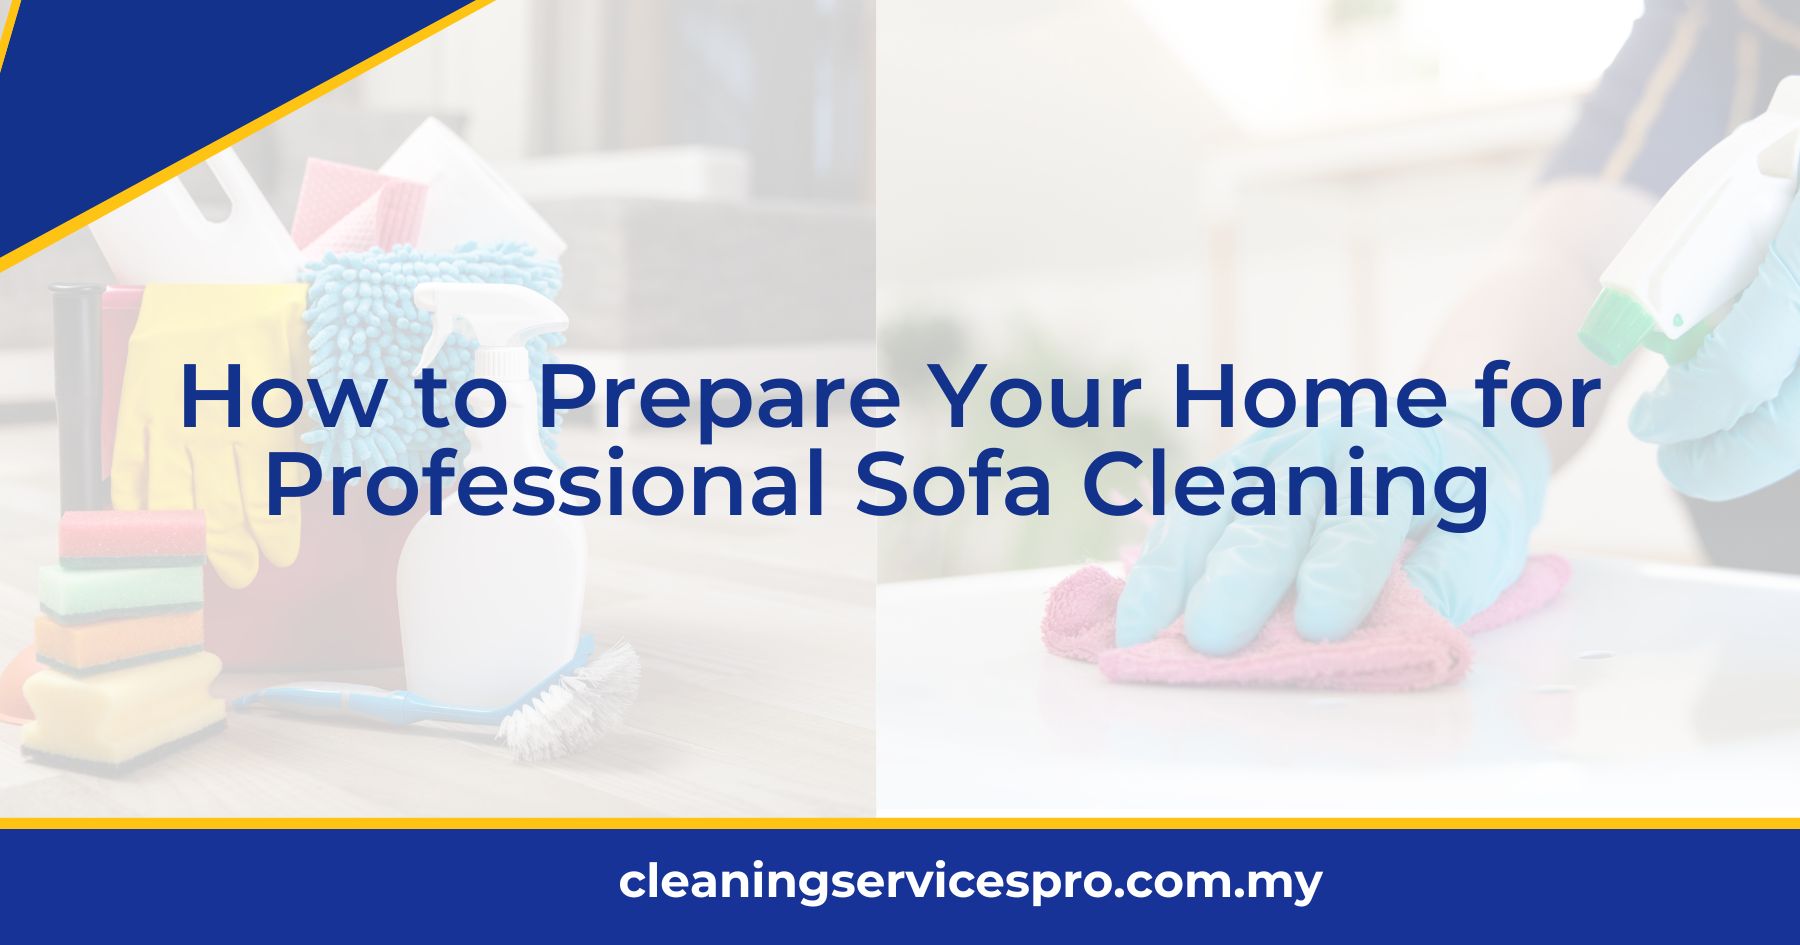 How to Prepare Your Home for Professional Sofa Cleaning